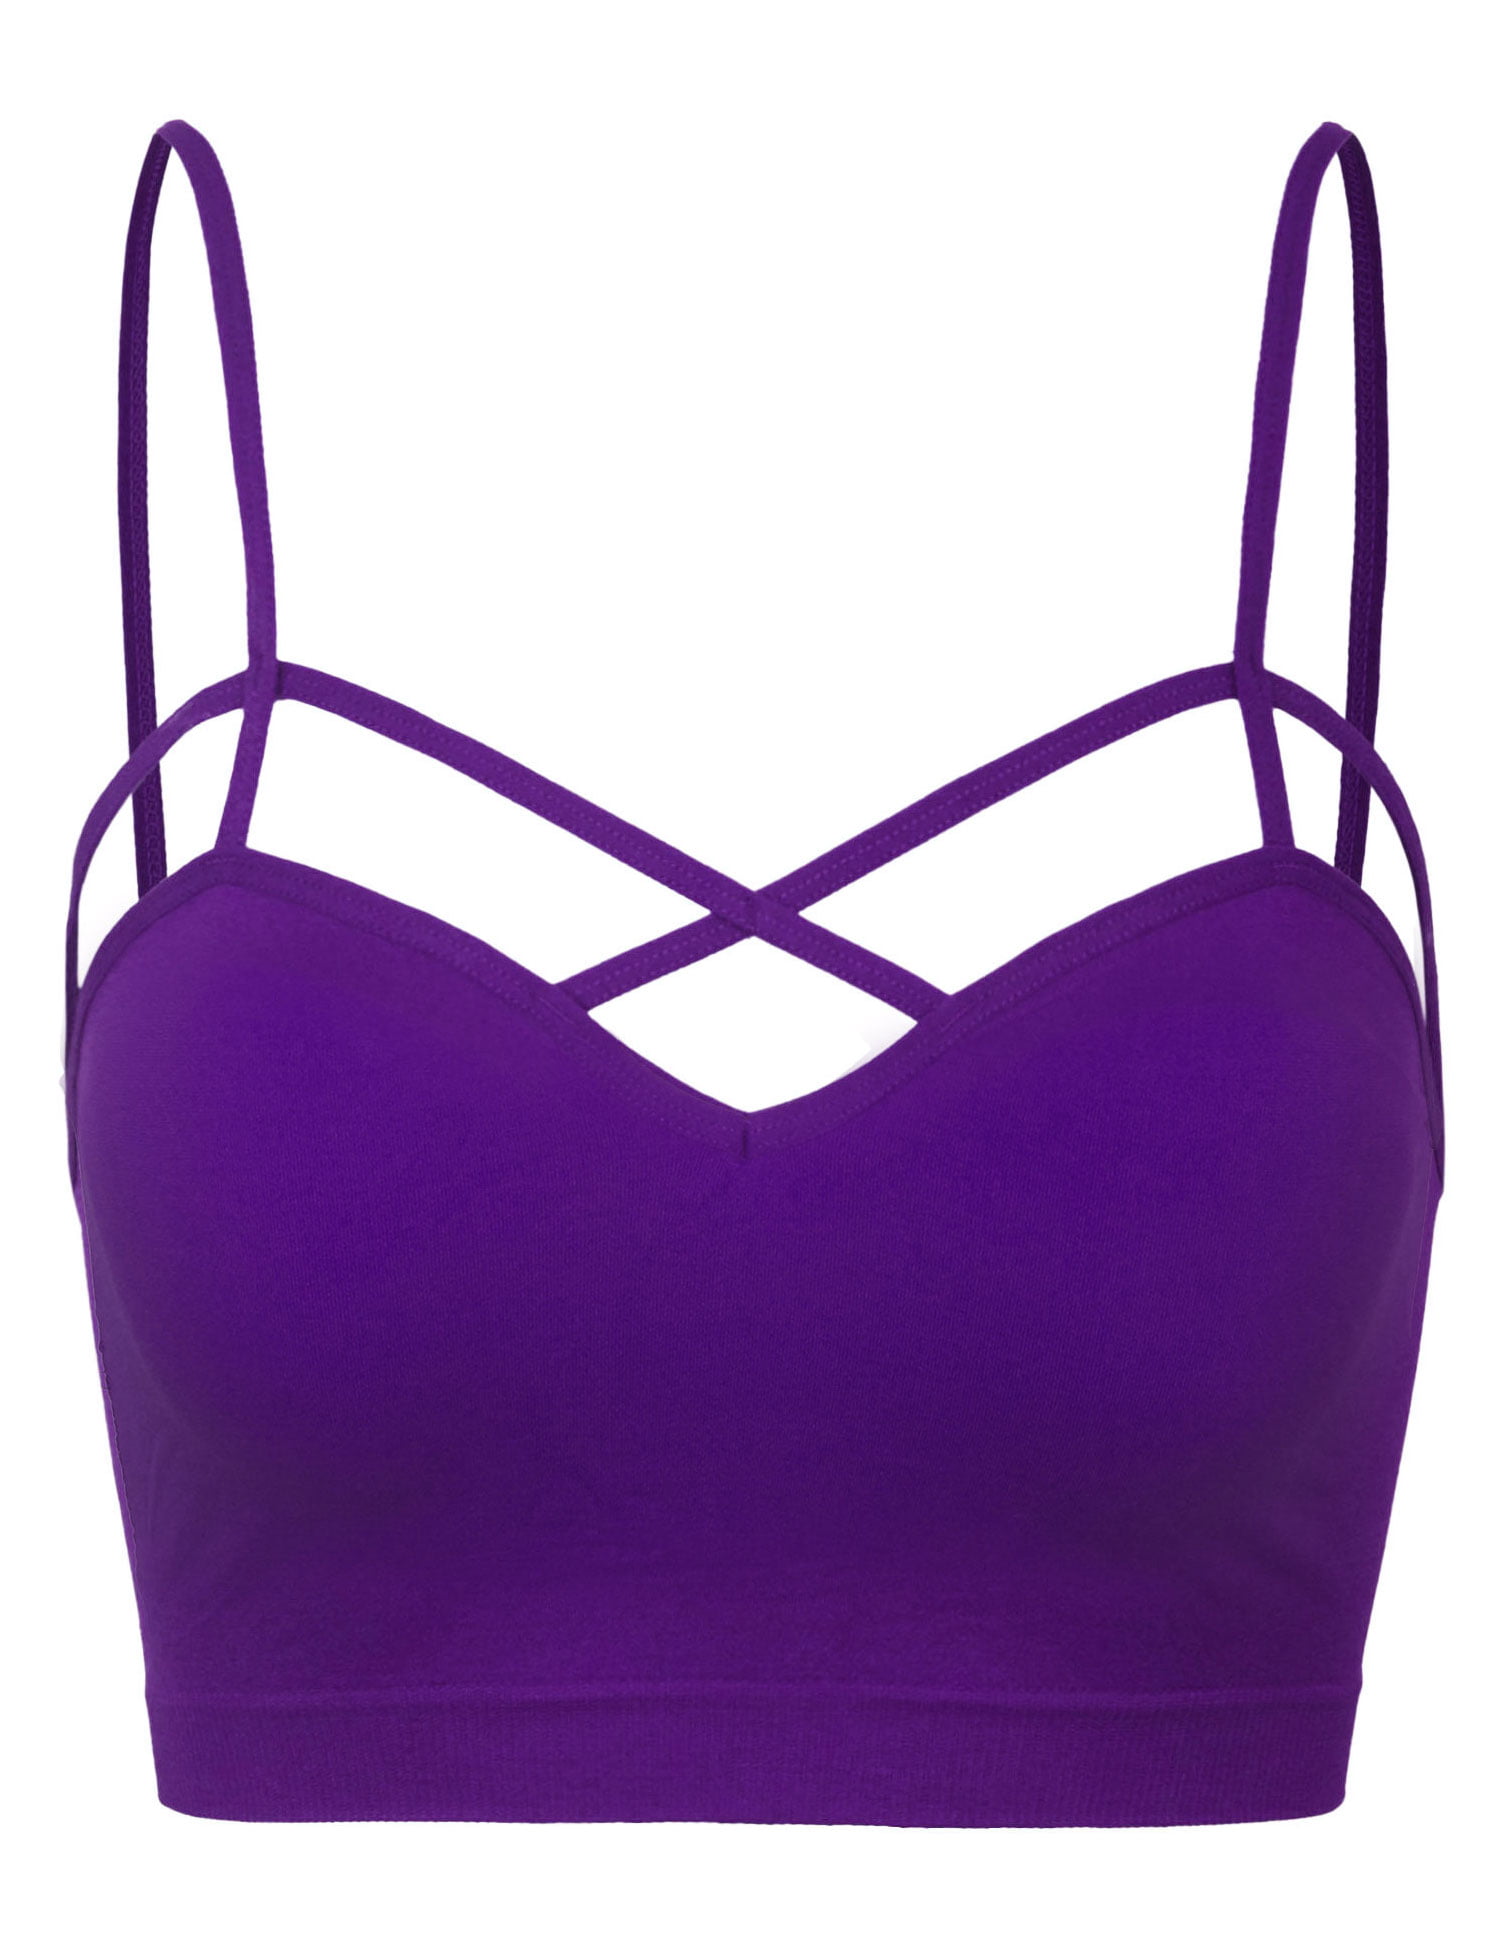 Women's Seamless Criss-Cross Front Bralette with Removable Bra Pads - KOGMO